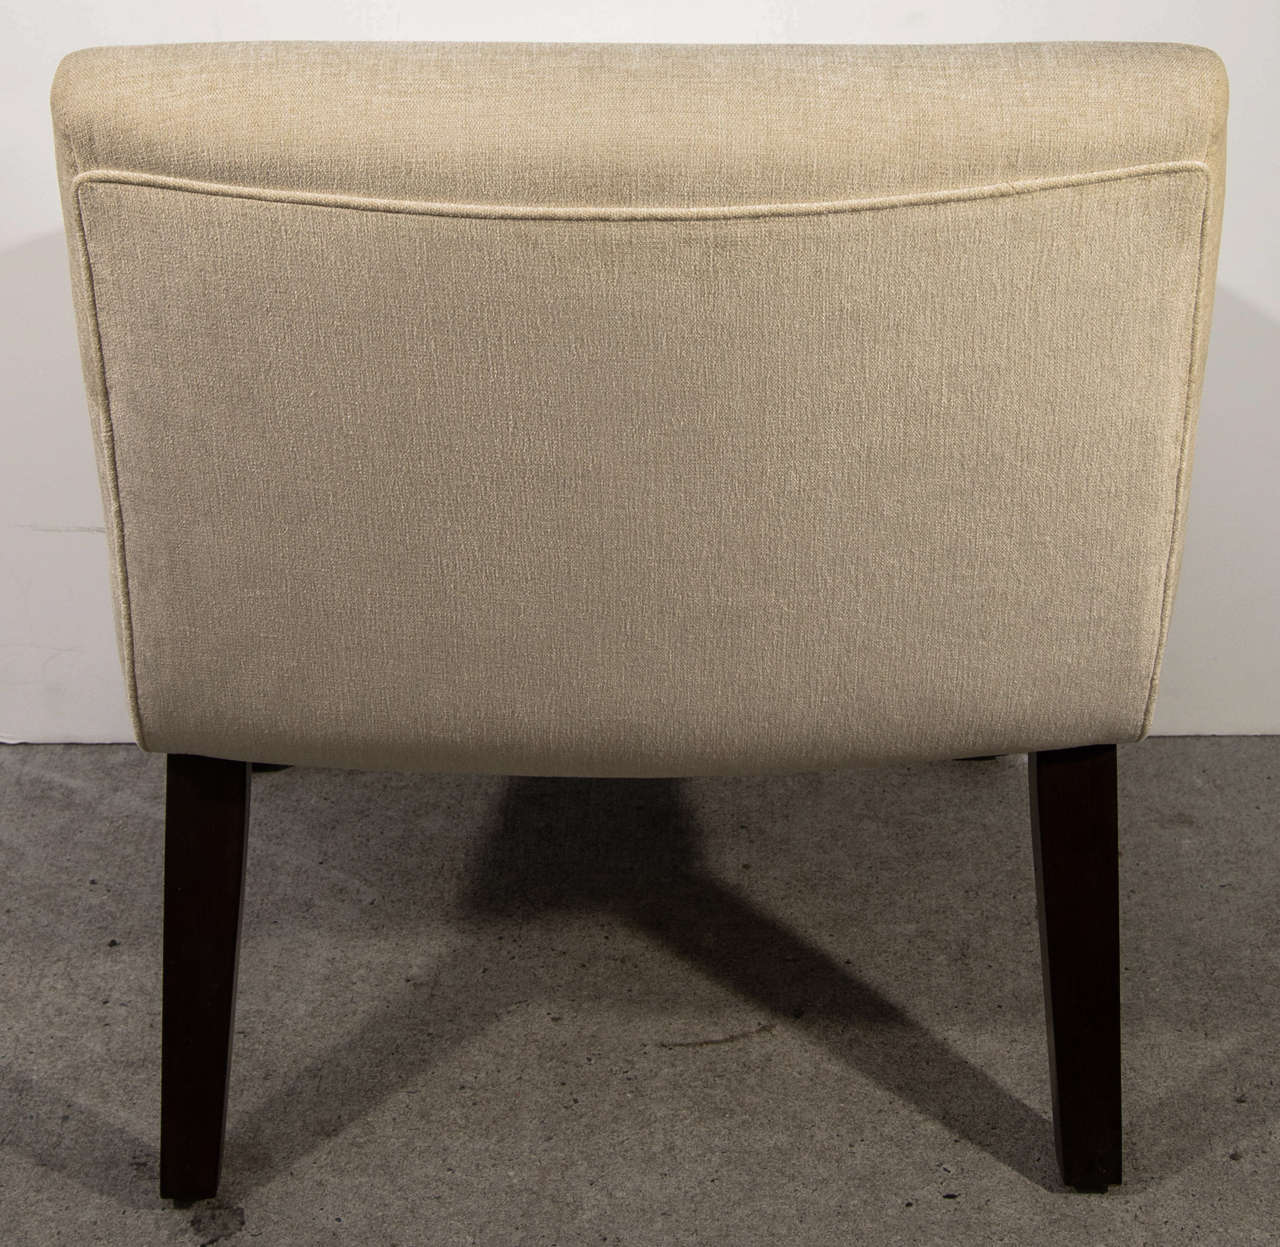 Stained Mid-Century Modern Style Slipper Chair in Cream Colored Chenille For Sale